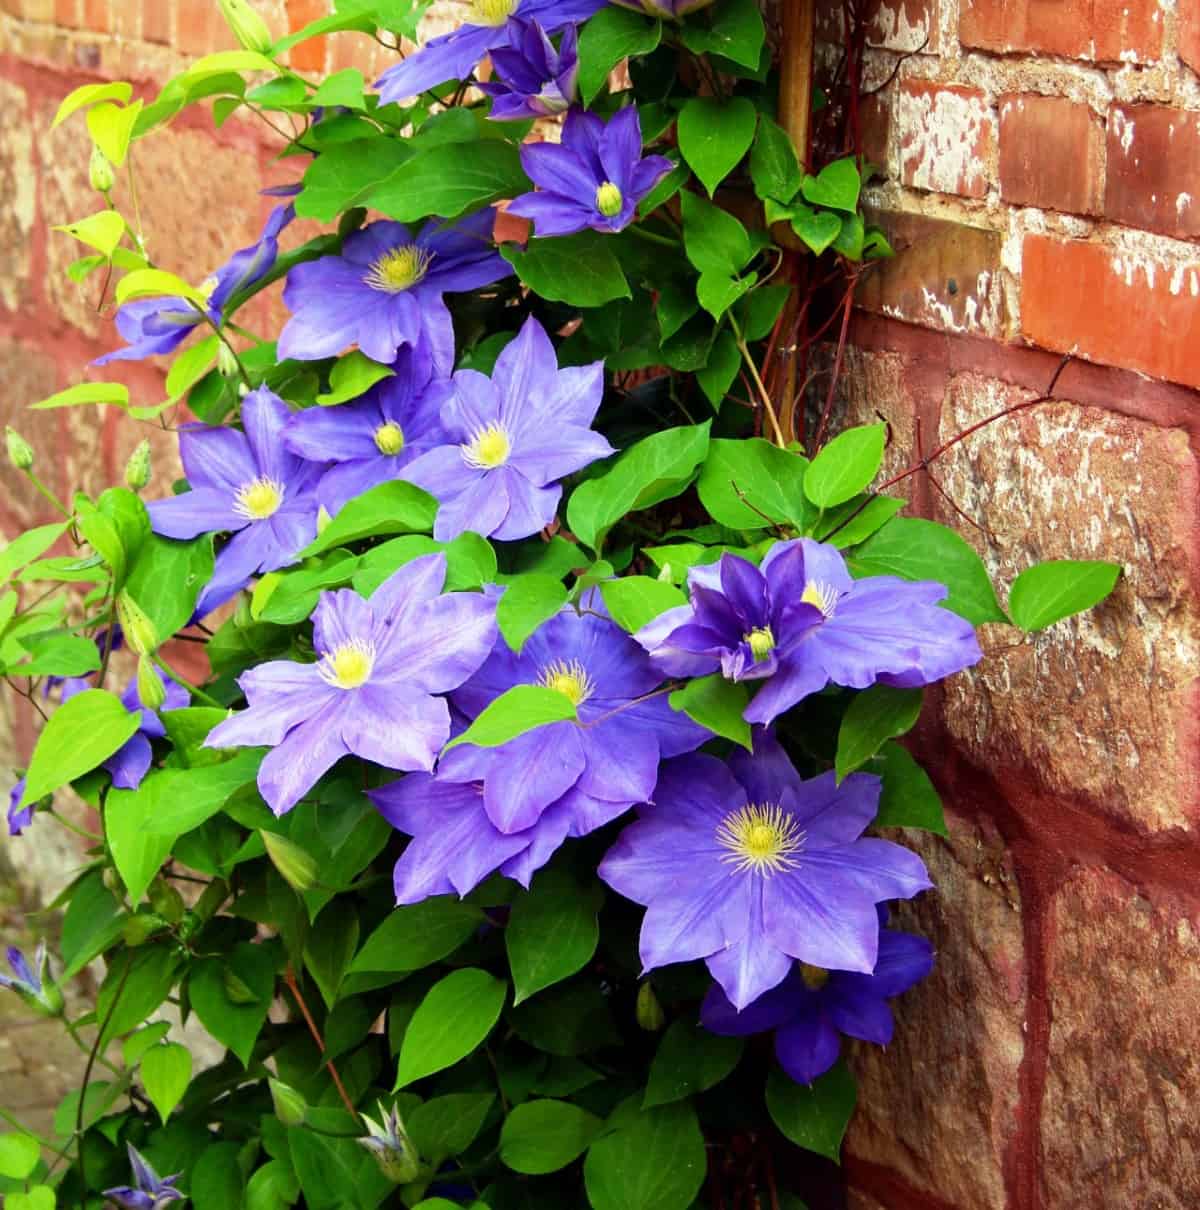 Clematis is a fragrant vine plant that is easy to grow.